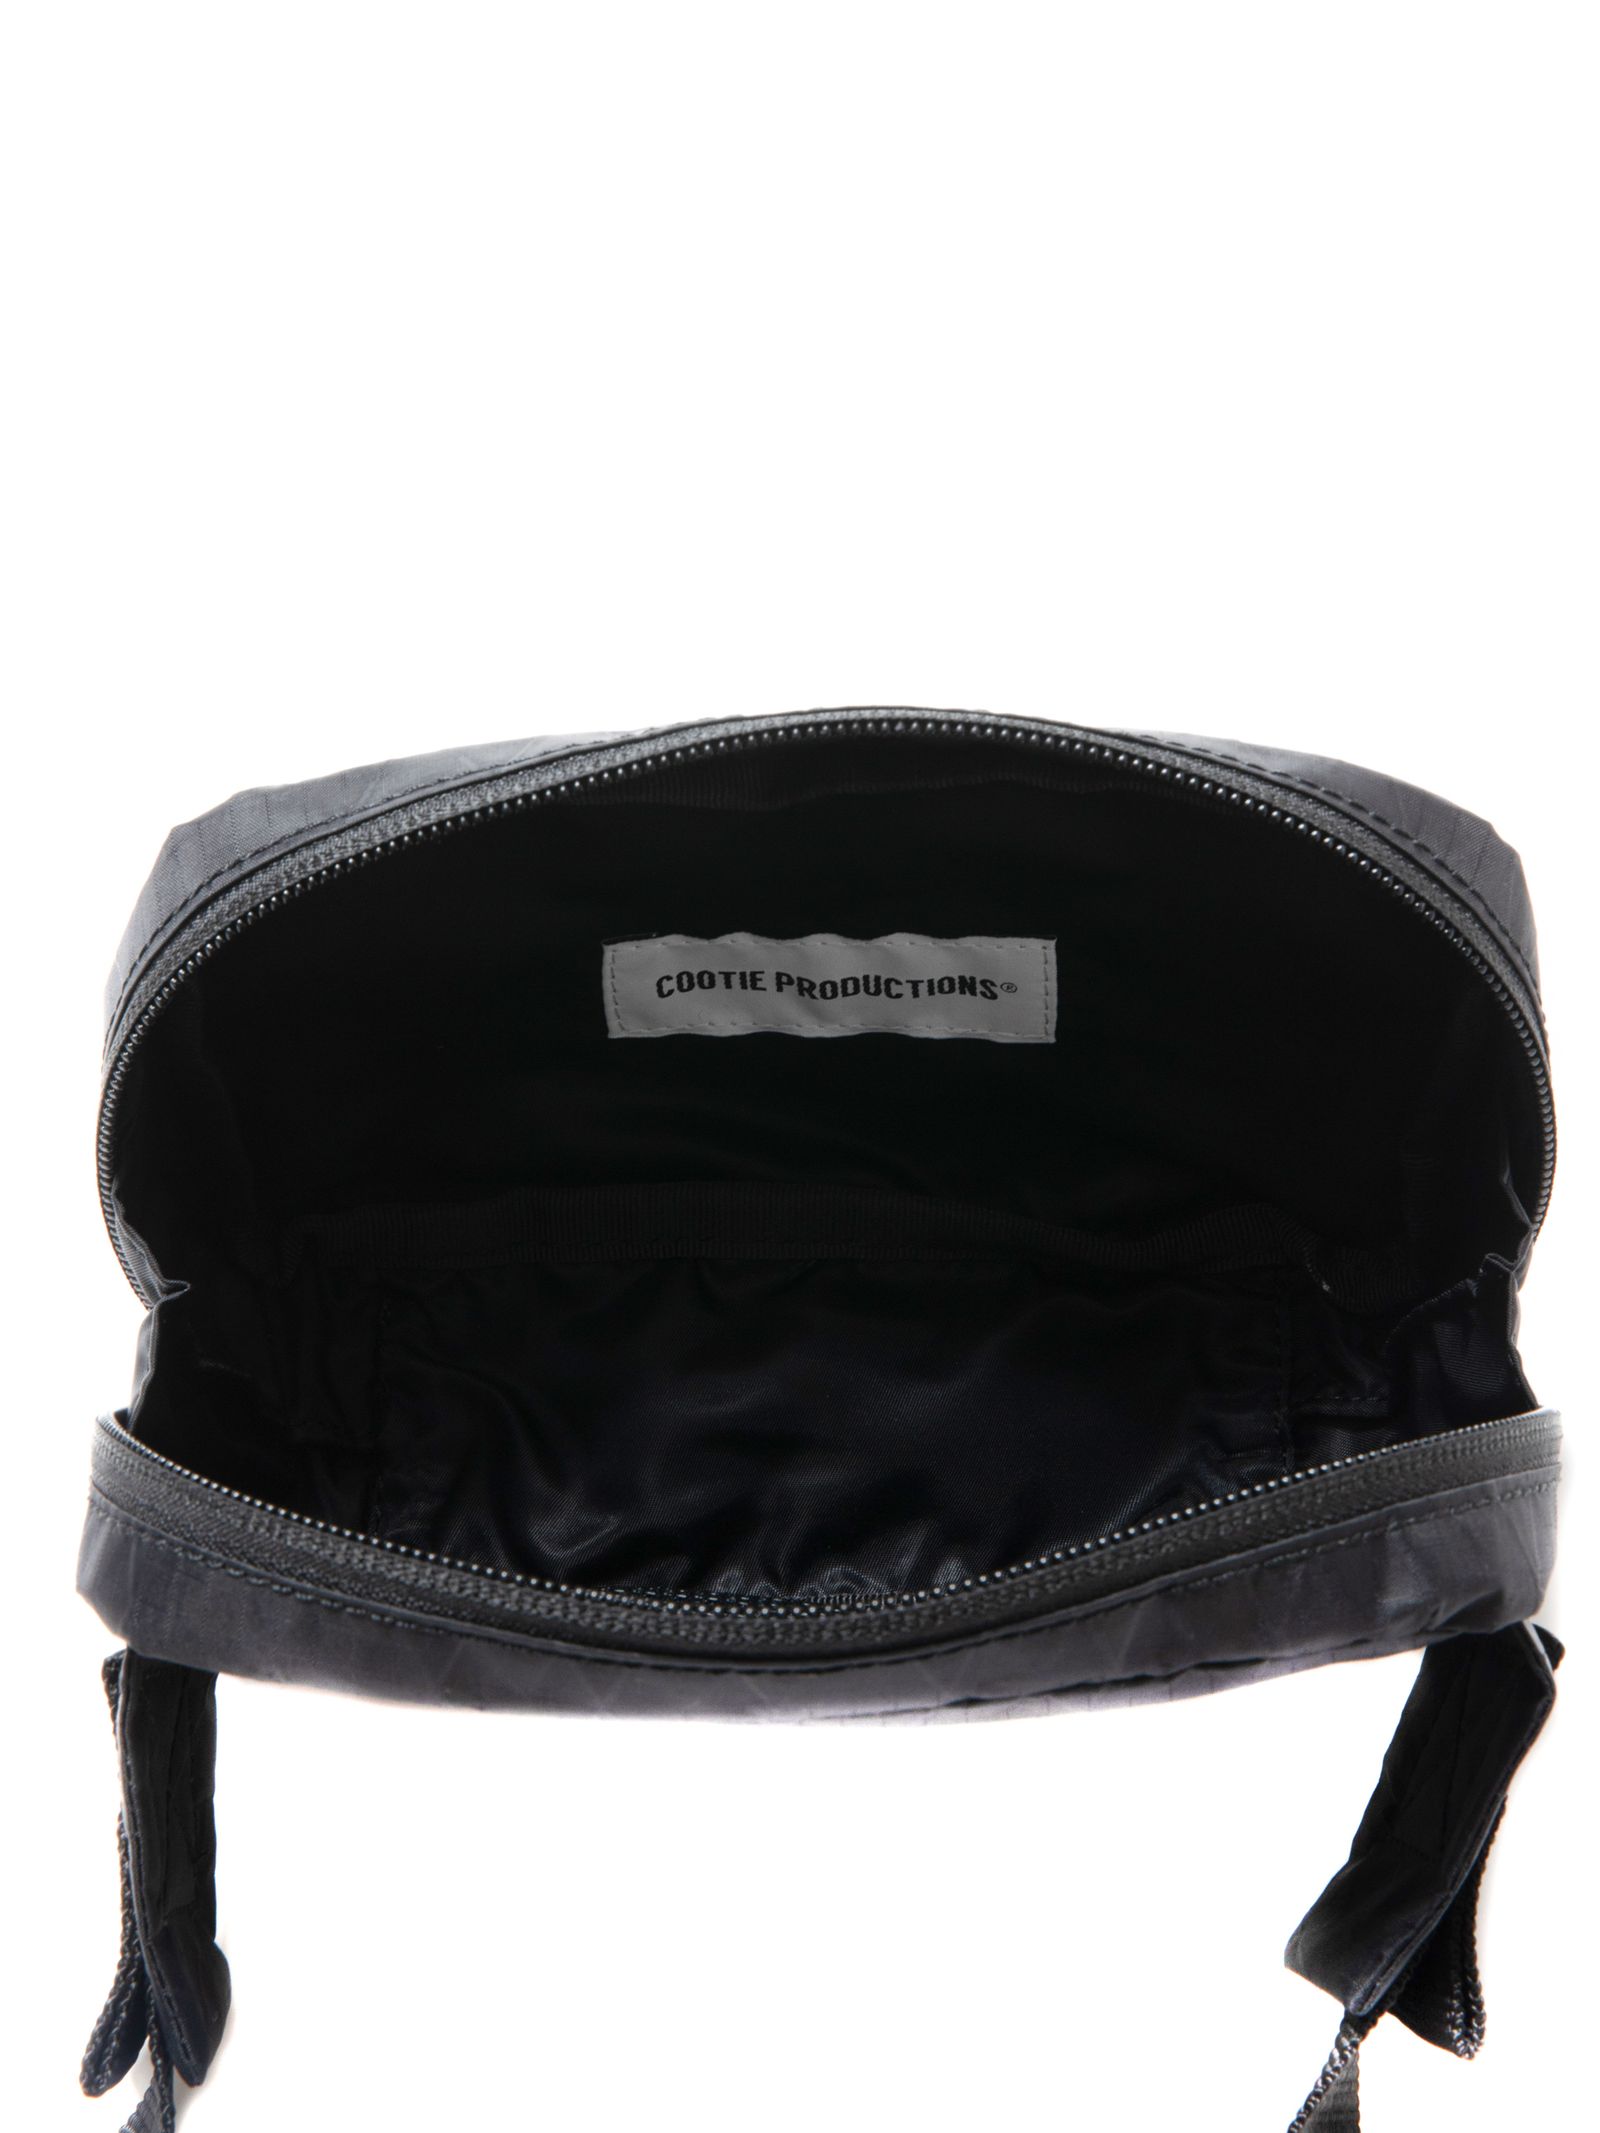 COOTIE PRODUCTIONS - 【ラスト1点】Compact Waist Bag (X-PAC) (BLACK 